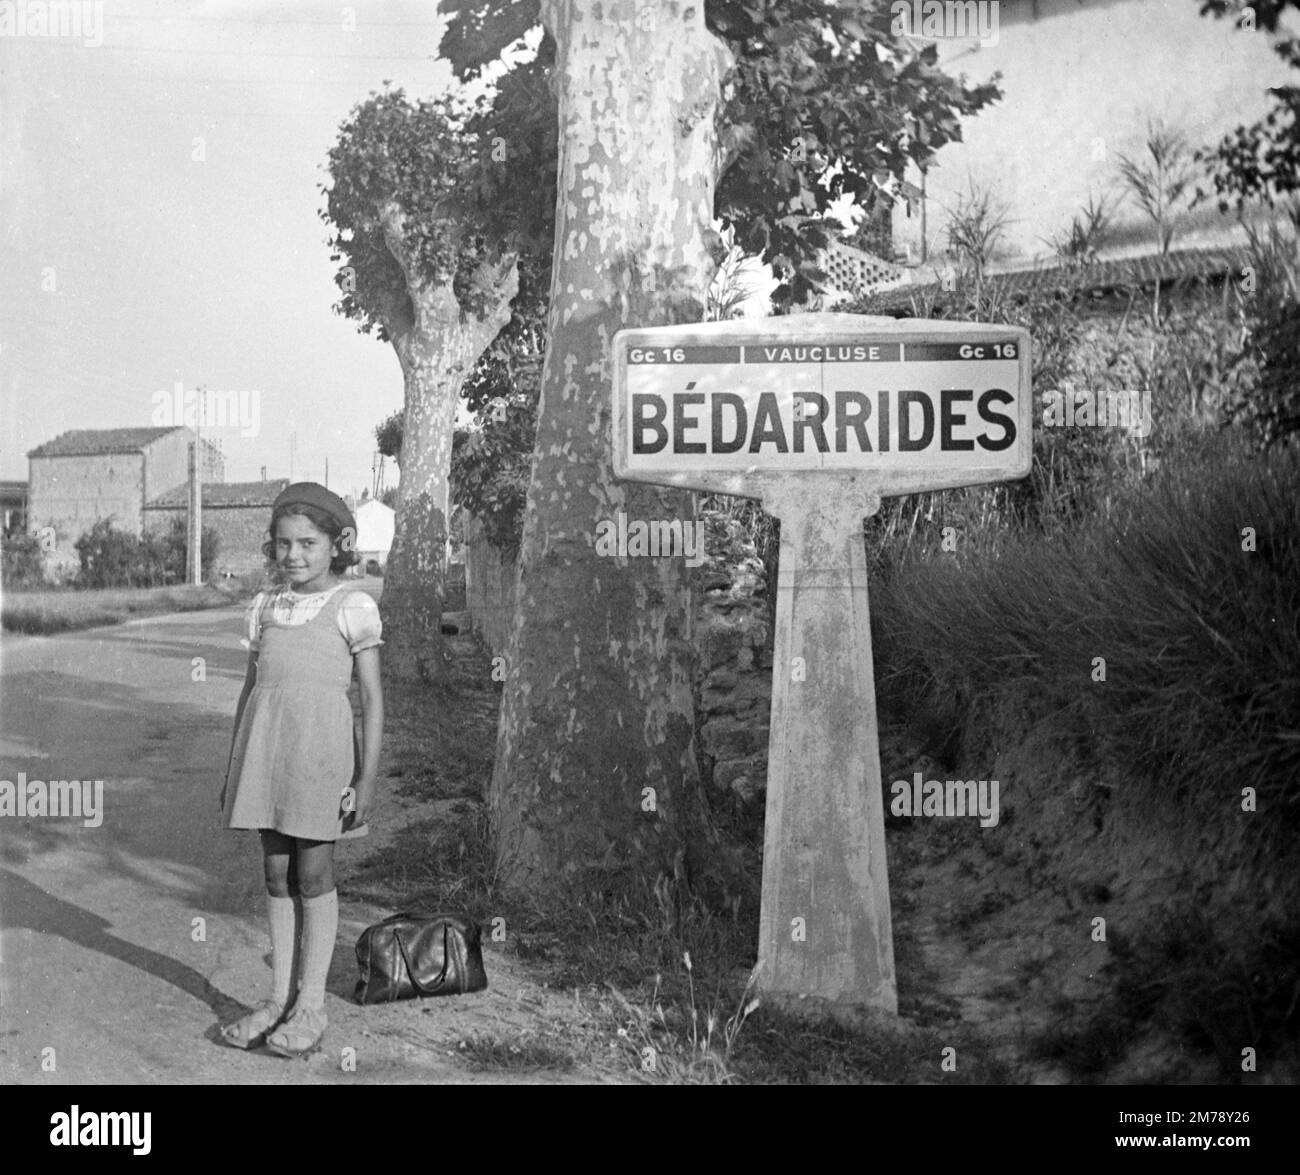 Young French Girl in Beret & 1940s Fashion or Clothes Poses Next to a Village Sign of Bedarrides in the Vaucluse Provence France. Vintage Black and White or Monochrome Photograph 1943 Stock Photo